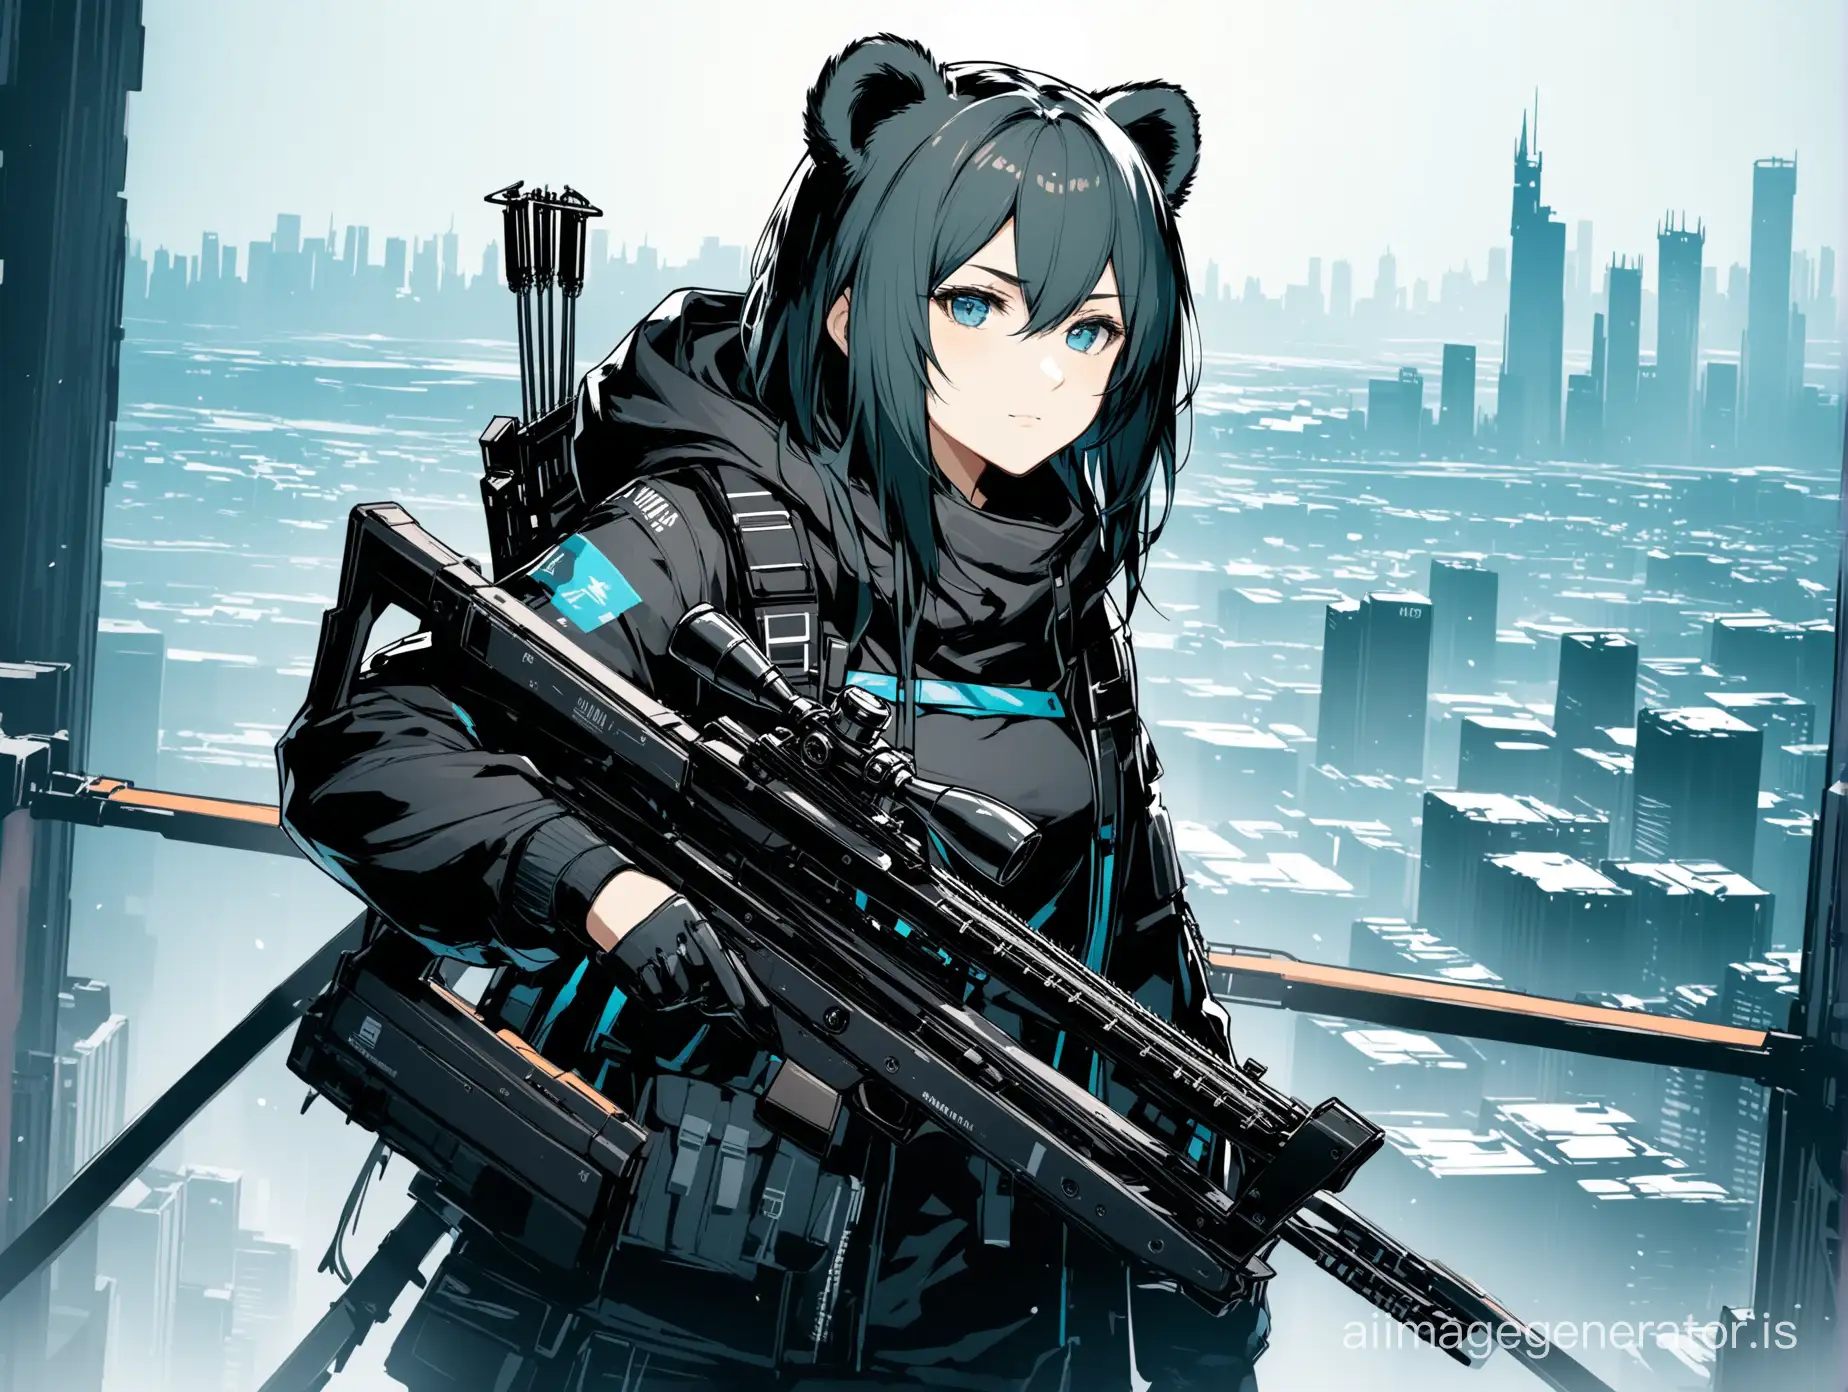 Arknights-Ursus-Operator-in-Action-Cityscape-Background